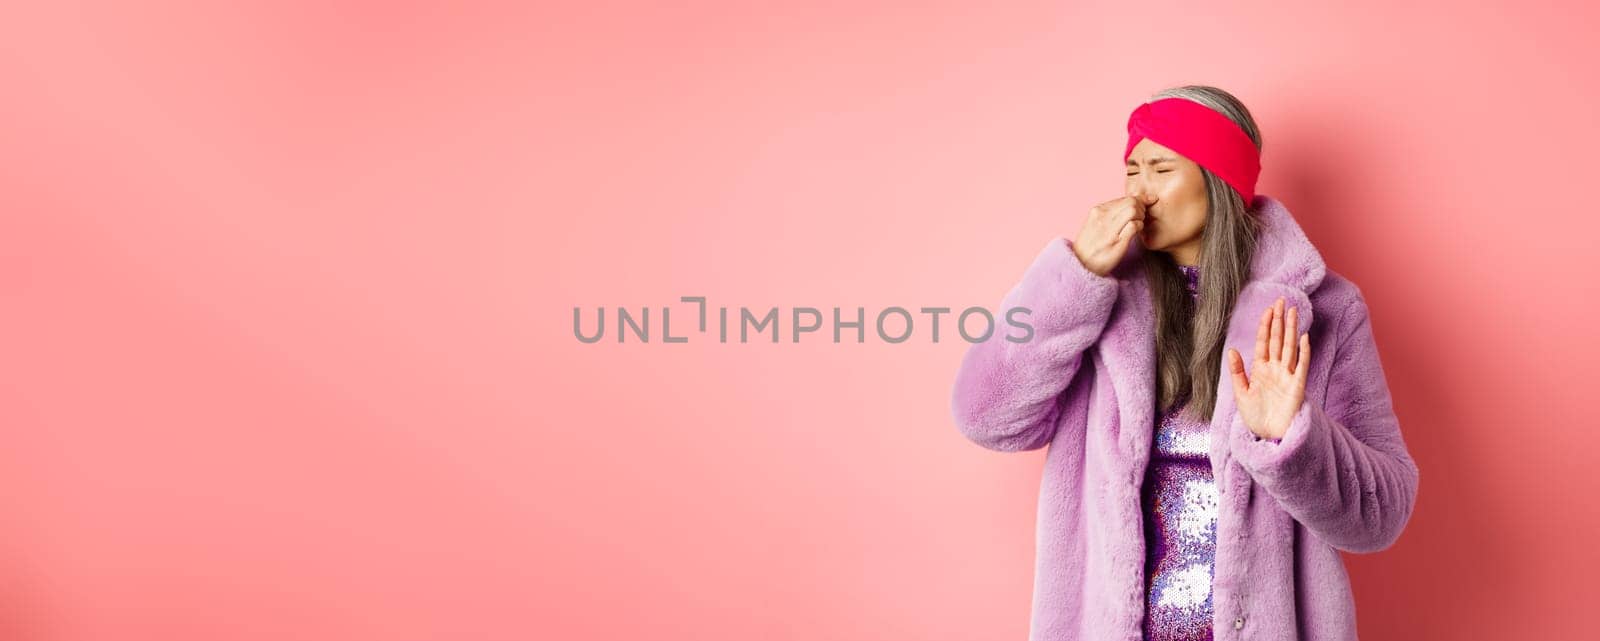 Disgusted asian mature woman in trendy purple winter coat and dress, shut nose and showing stop, refusal gesture, smell something disgusting, standing over pink background.